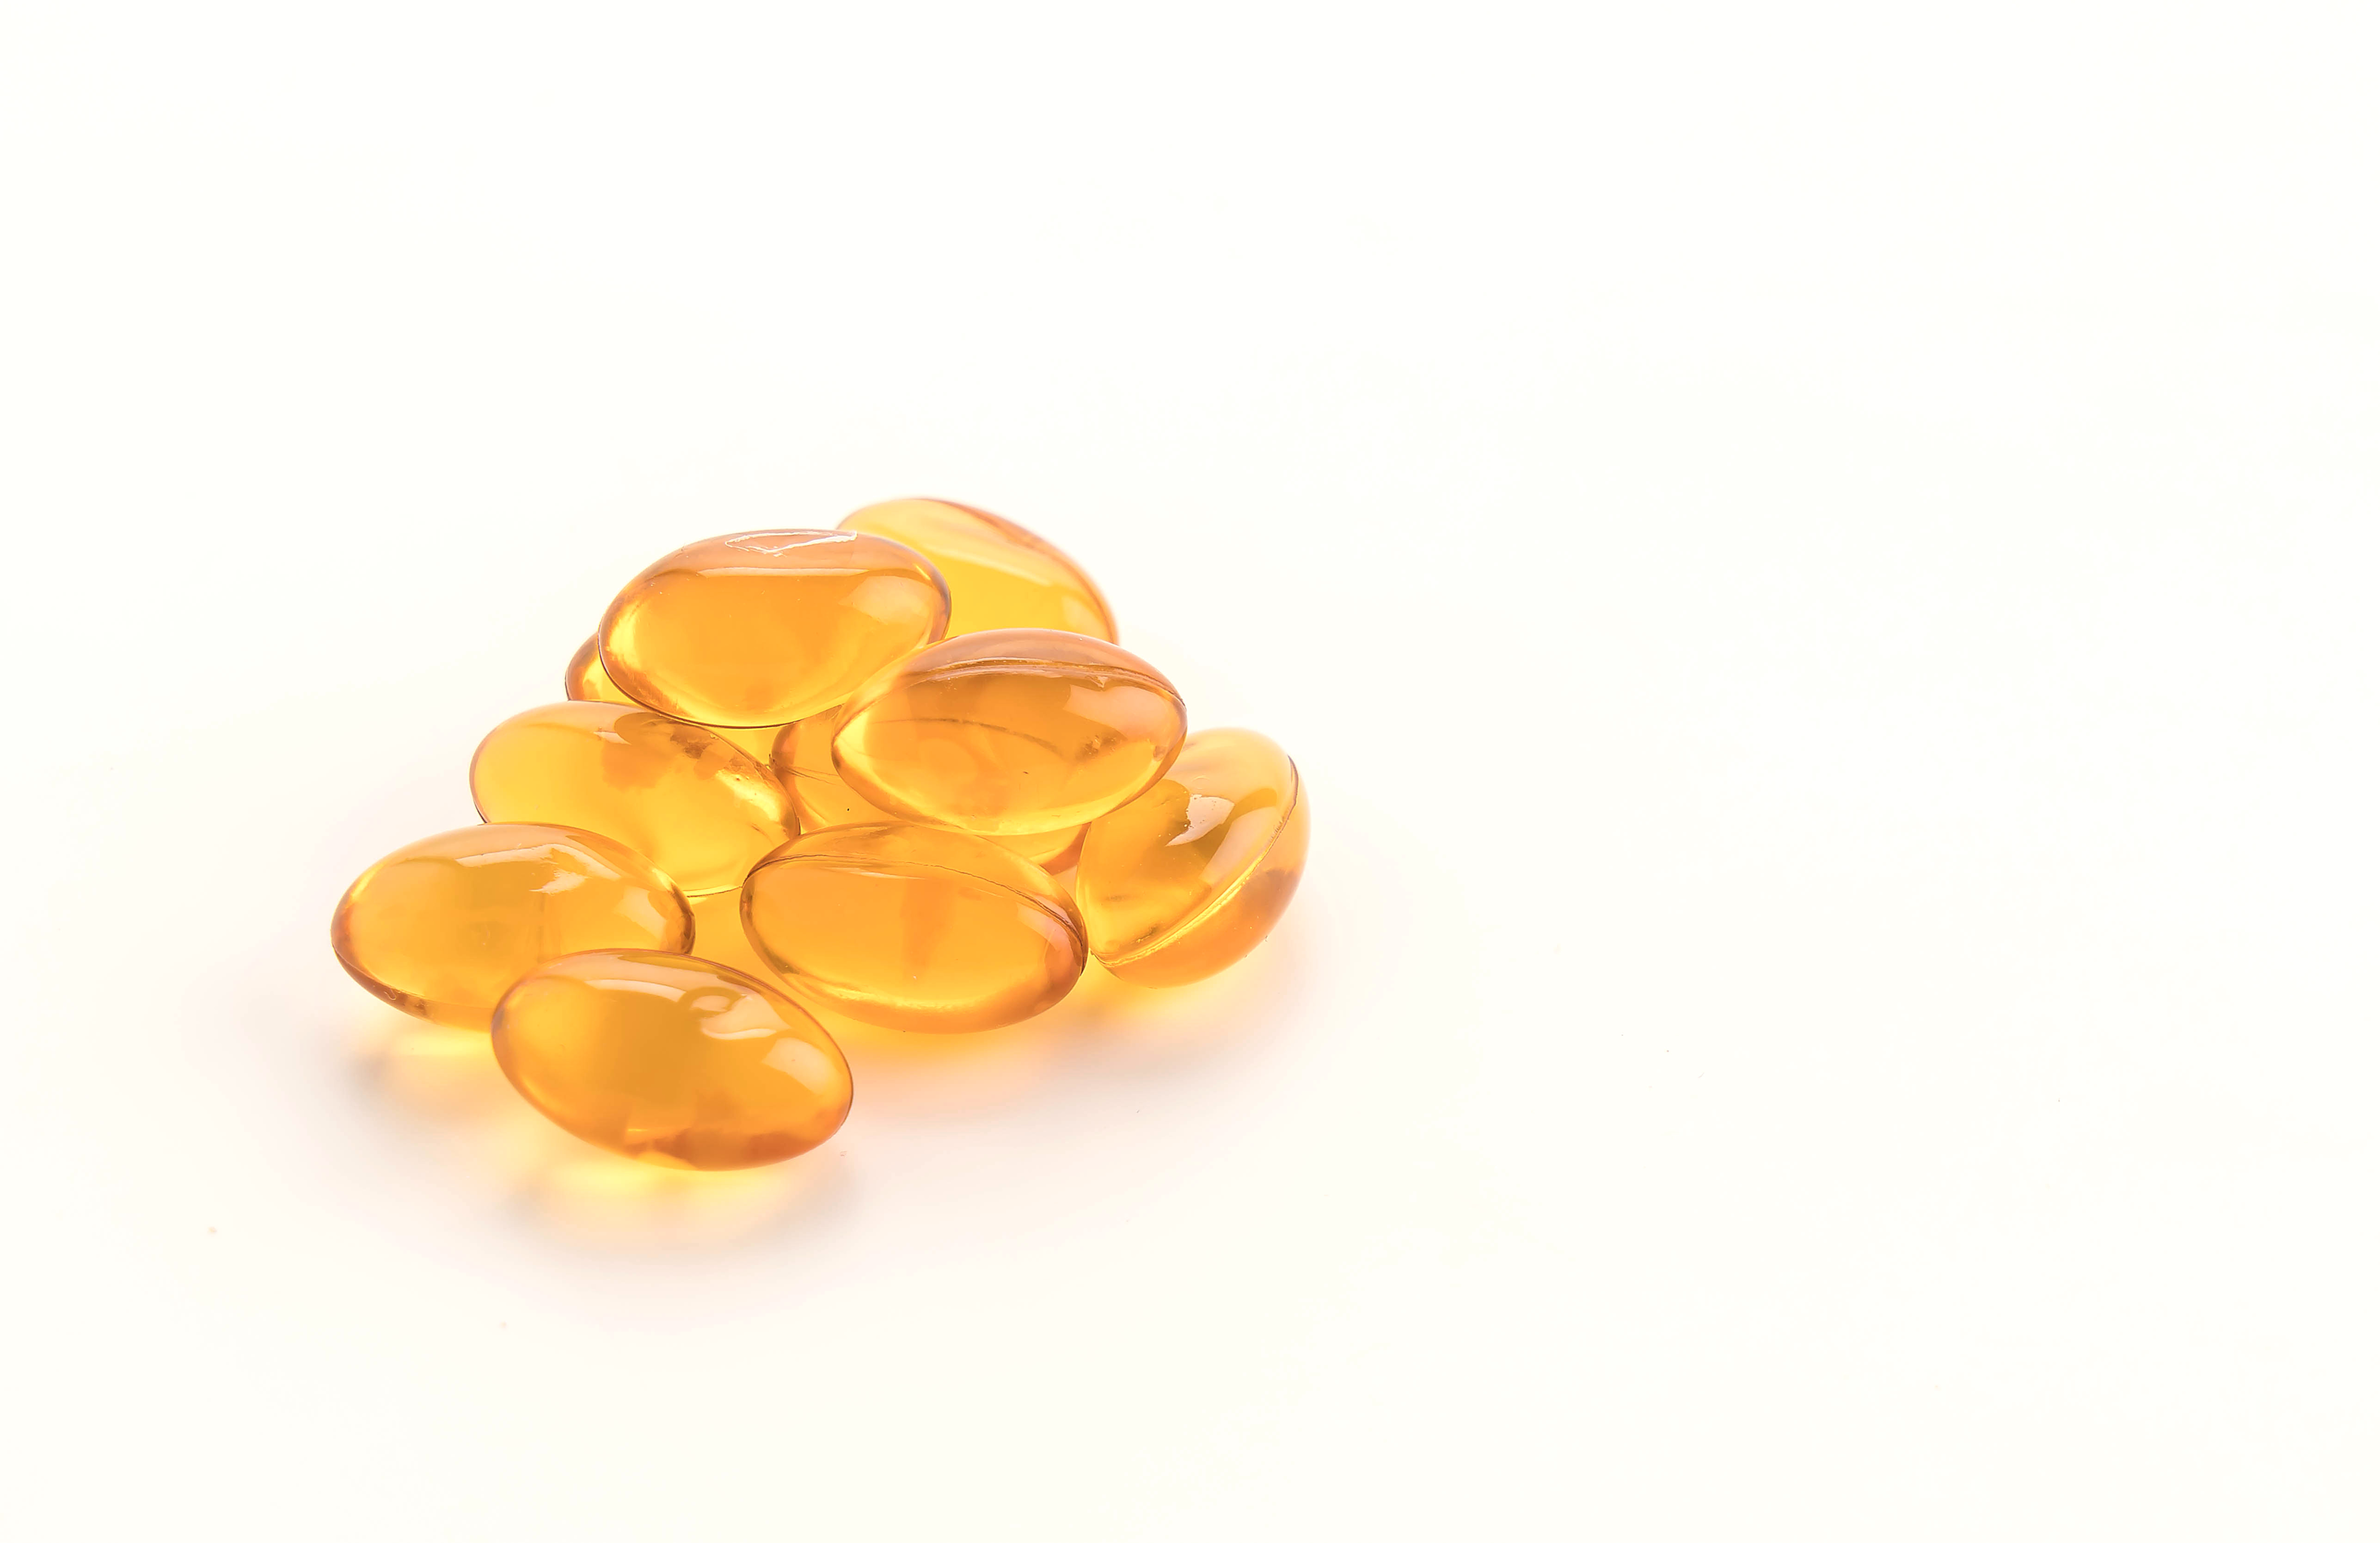 Vitamin D can be found in both your daily diet and supplementary pills